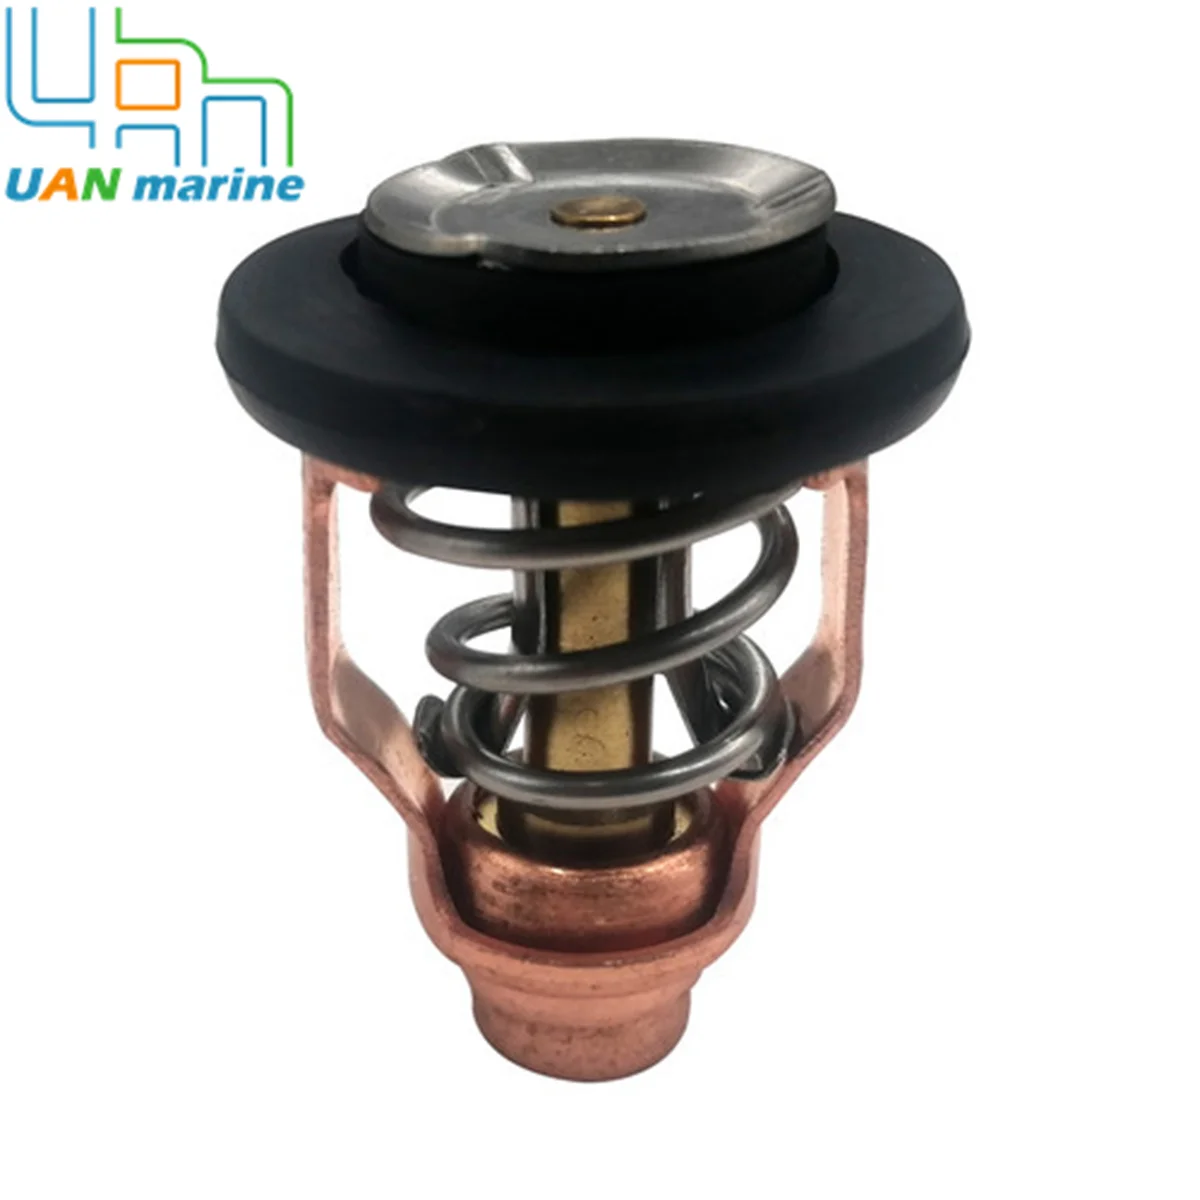 6CE-12411  Thermostat 52℃/125℉ For Yamaha 225 250 300 HP 4 Stroke Outboard Motor  6CE-12411-00-00 Sierra 18-3524